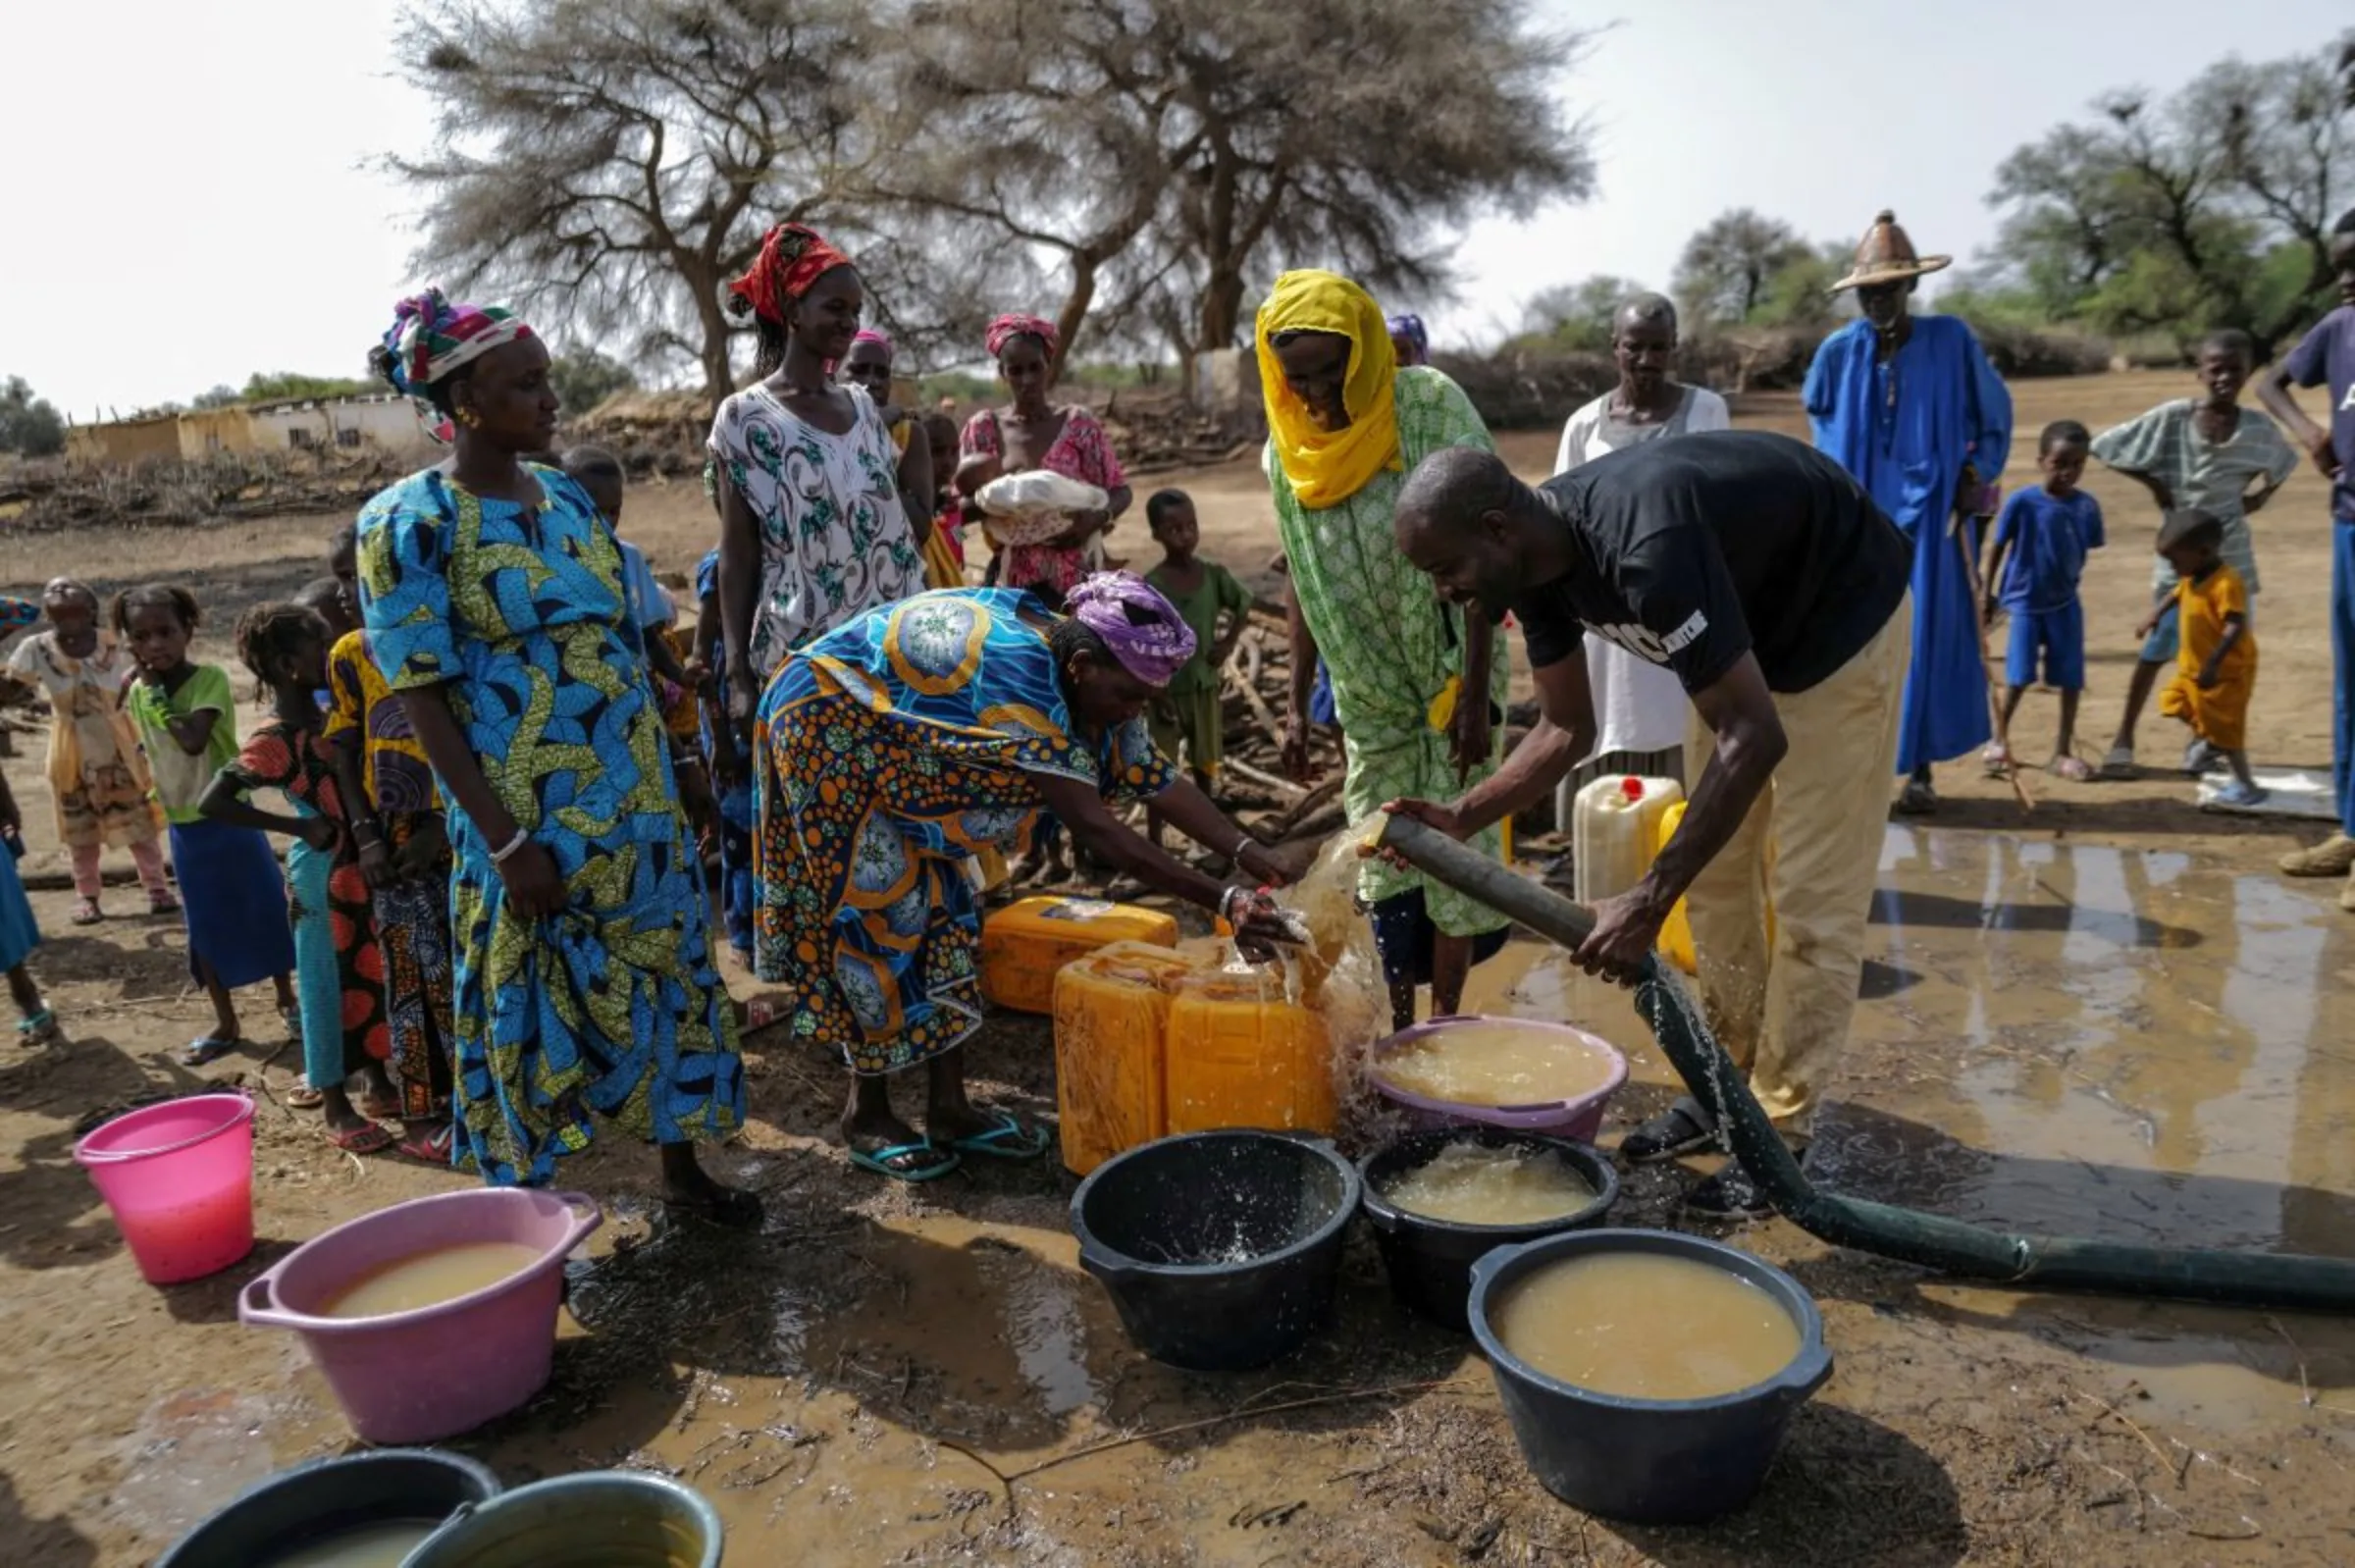 A social activist who gained recognition for renovating schools and is now crowdfunding to build wells in villages around Senegal with no access to water, pumps water from a well that is being constructed in Ourou Amady Bagga, Podor region, Senegal July 8, 2023.REUTERS/Zohra Bensemra